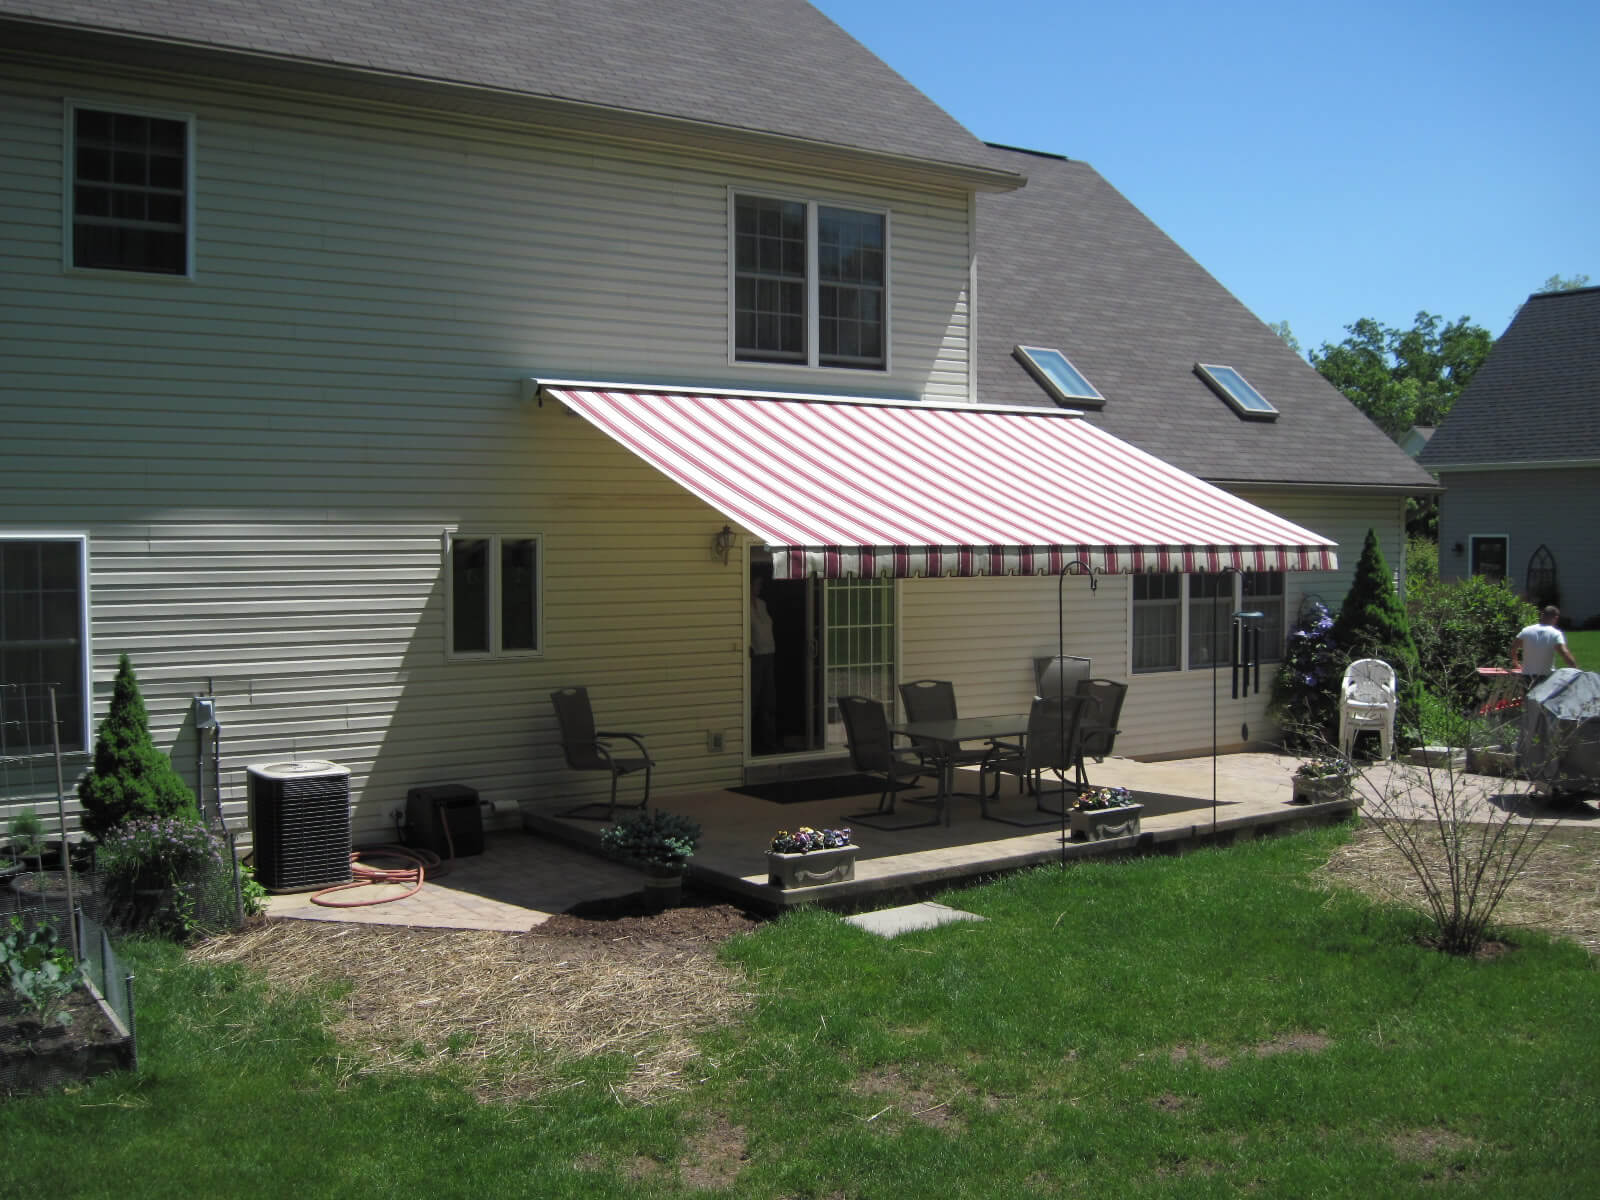 Indicators on Aluminum Awnings You Should Know